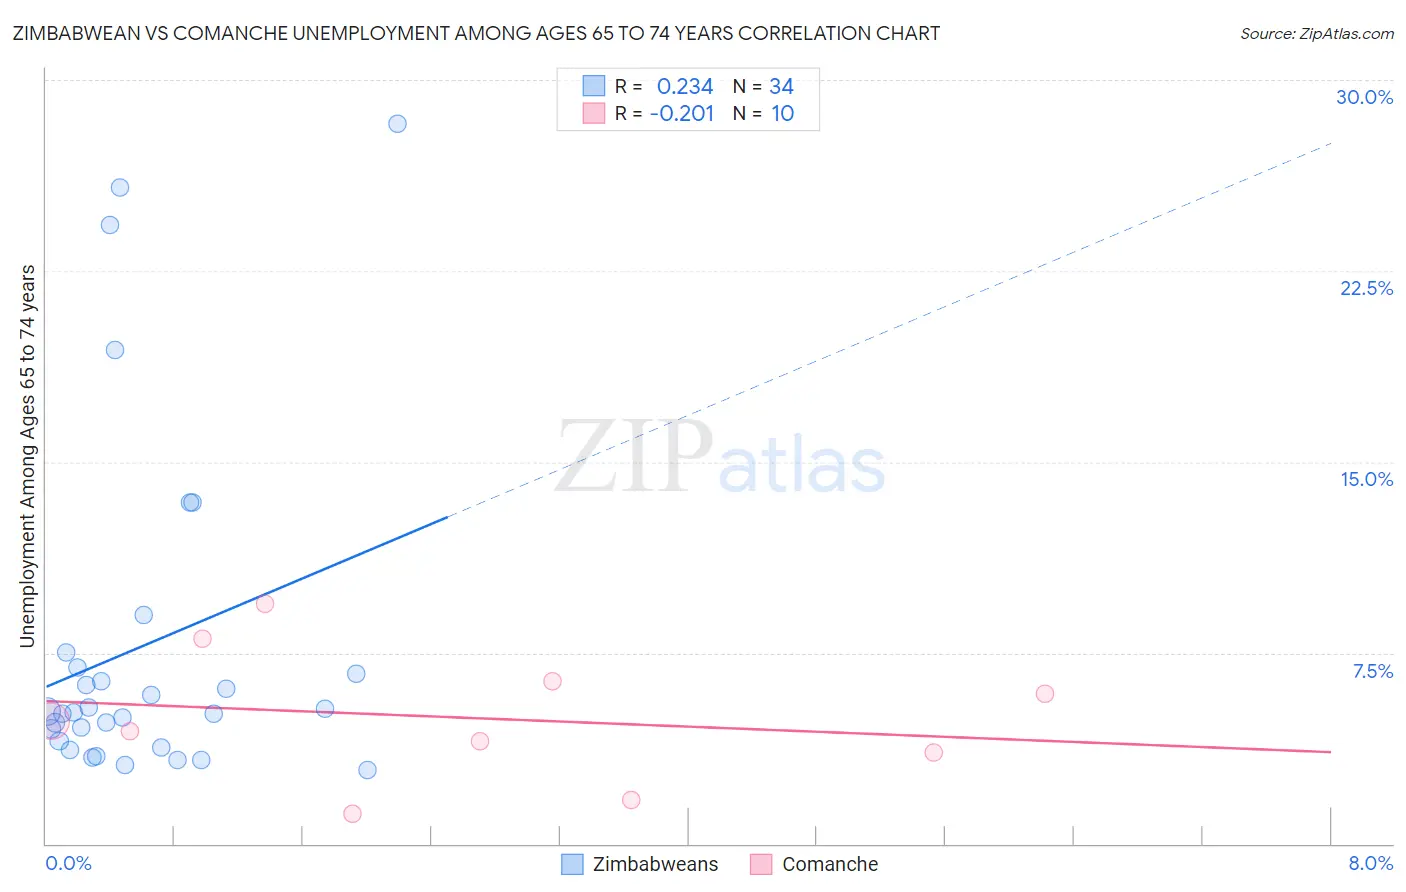 Zimbabwean vs Comanche Unemployment Among Ages 65 to 74 years